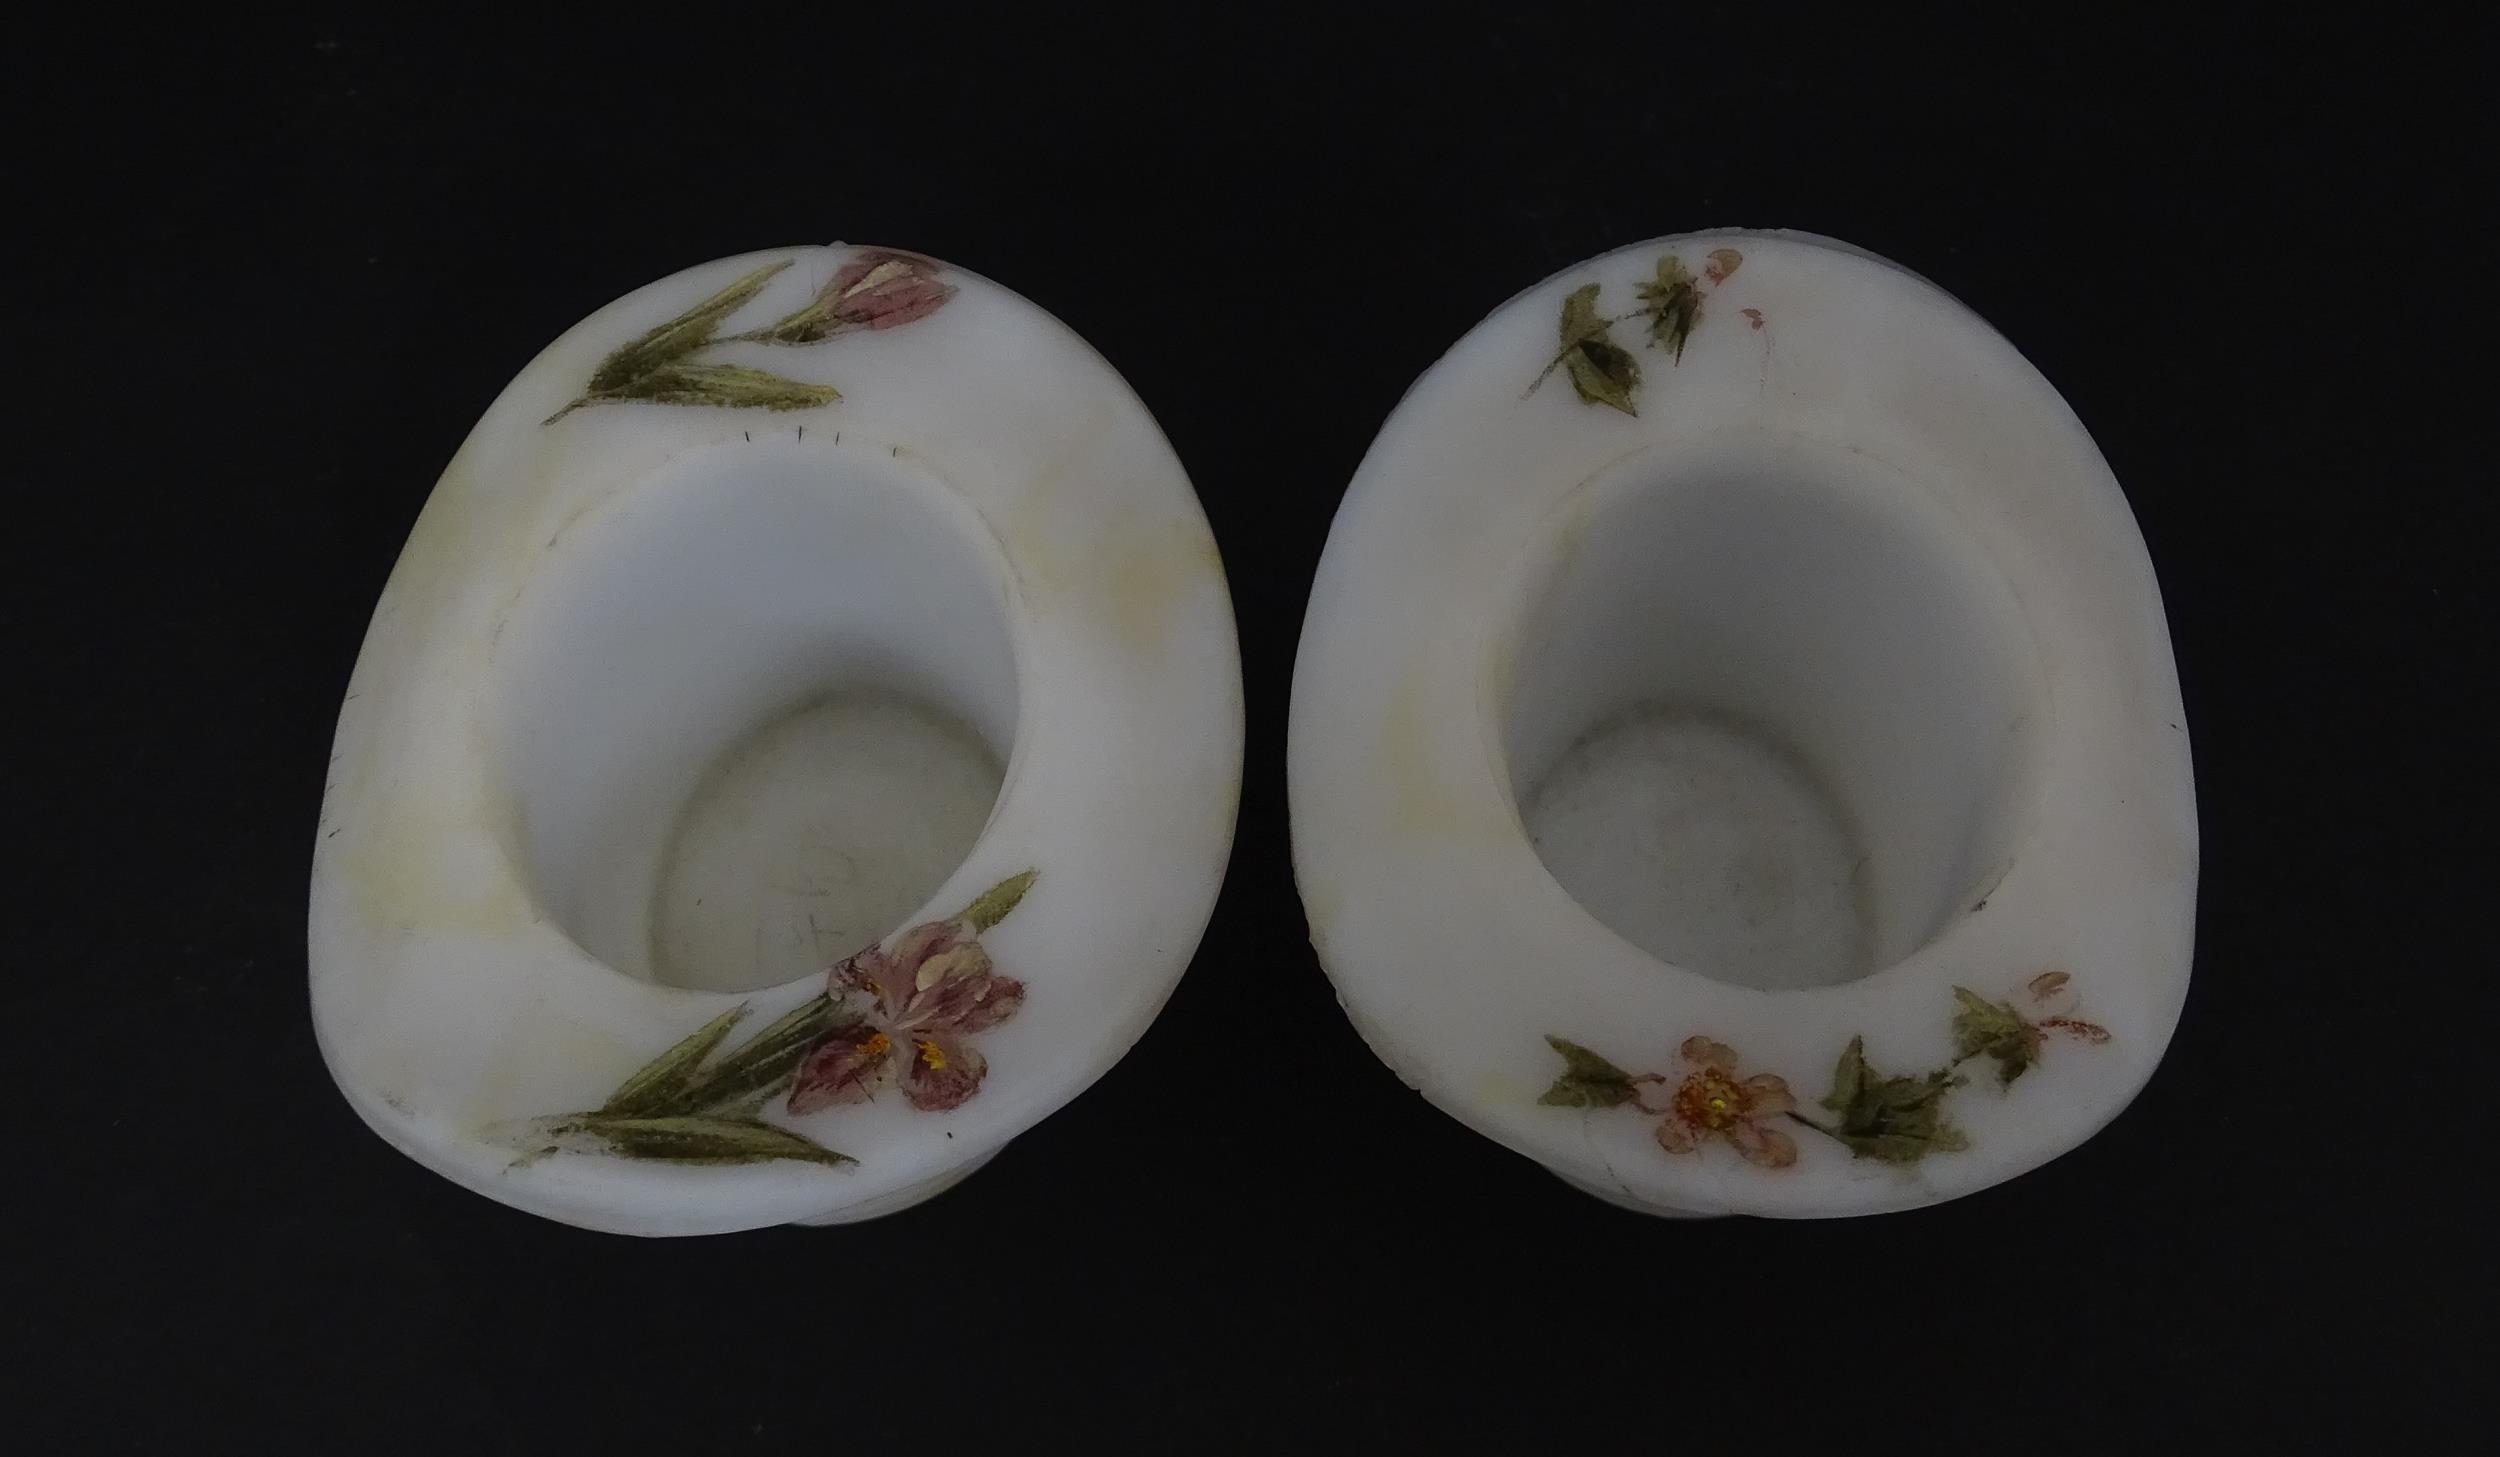 A pair of milk glass match holders / vesta keeps formed as top hats with hand painted floral detail. - Image 13 of 13